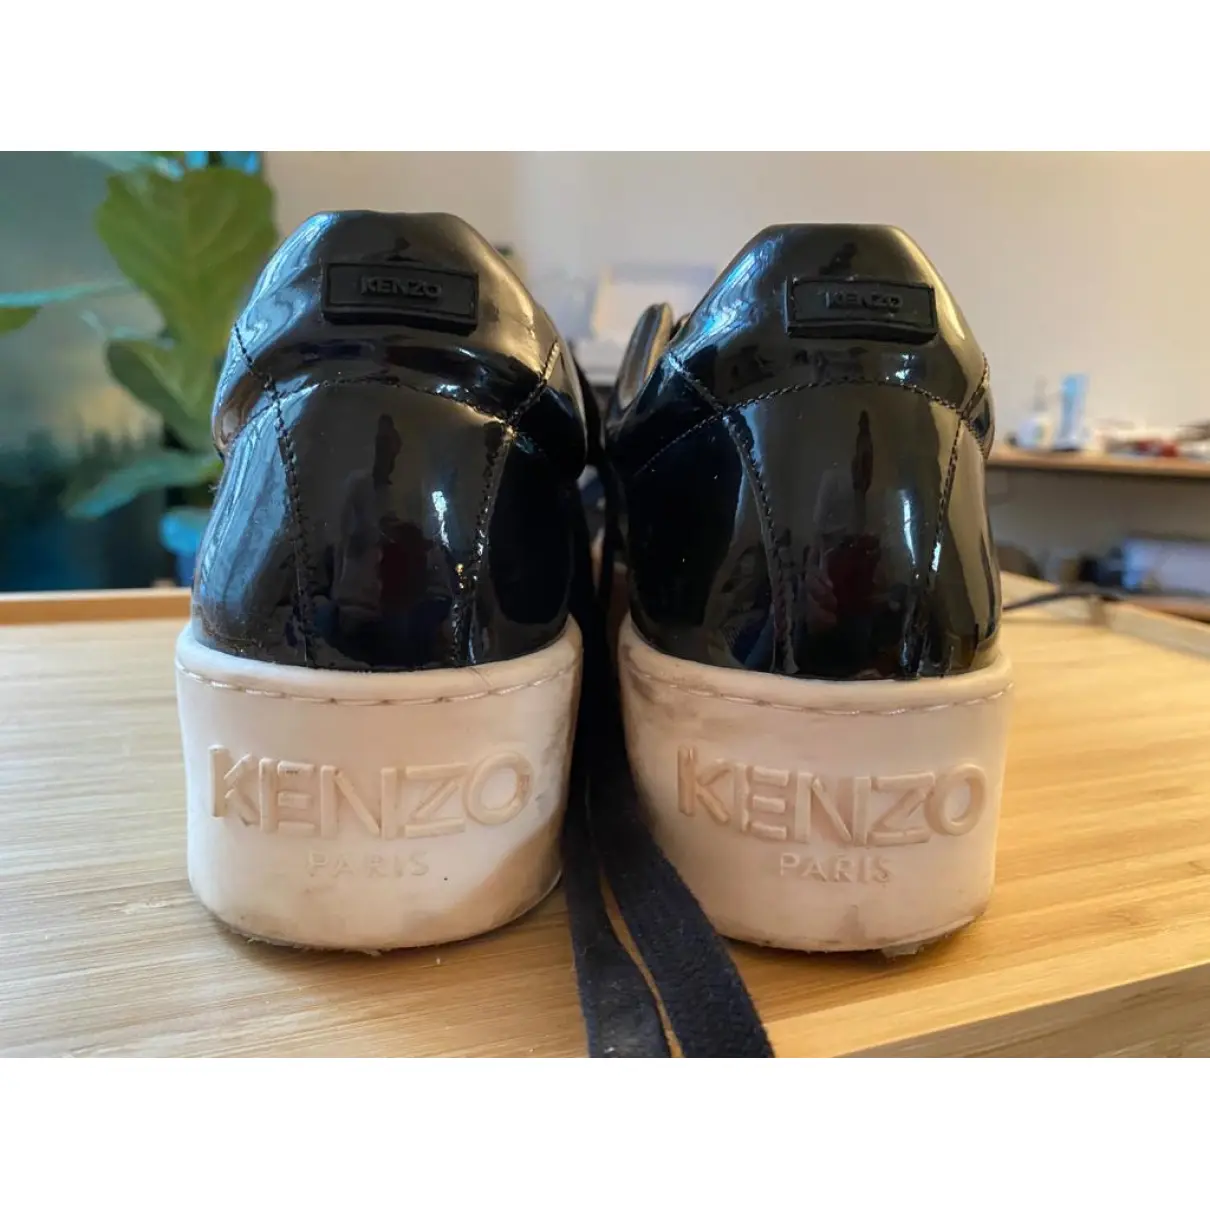 Patent leather trainers Kenzo